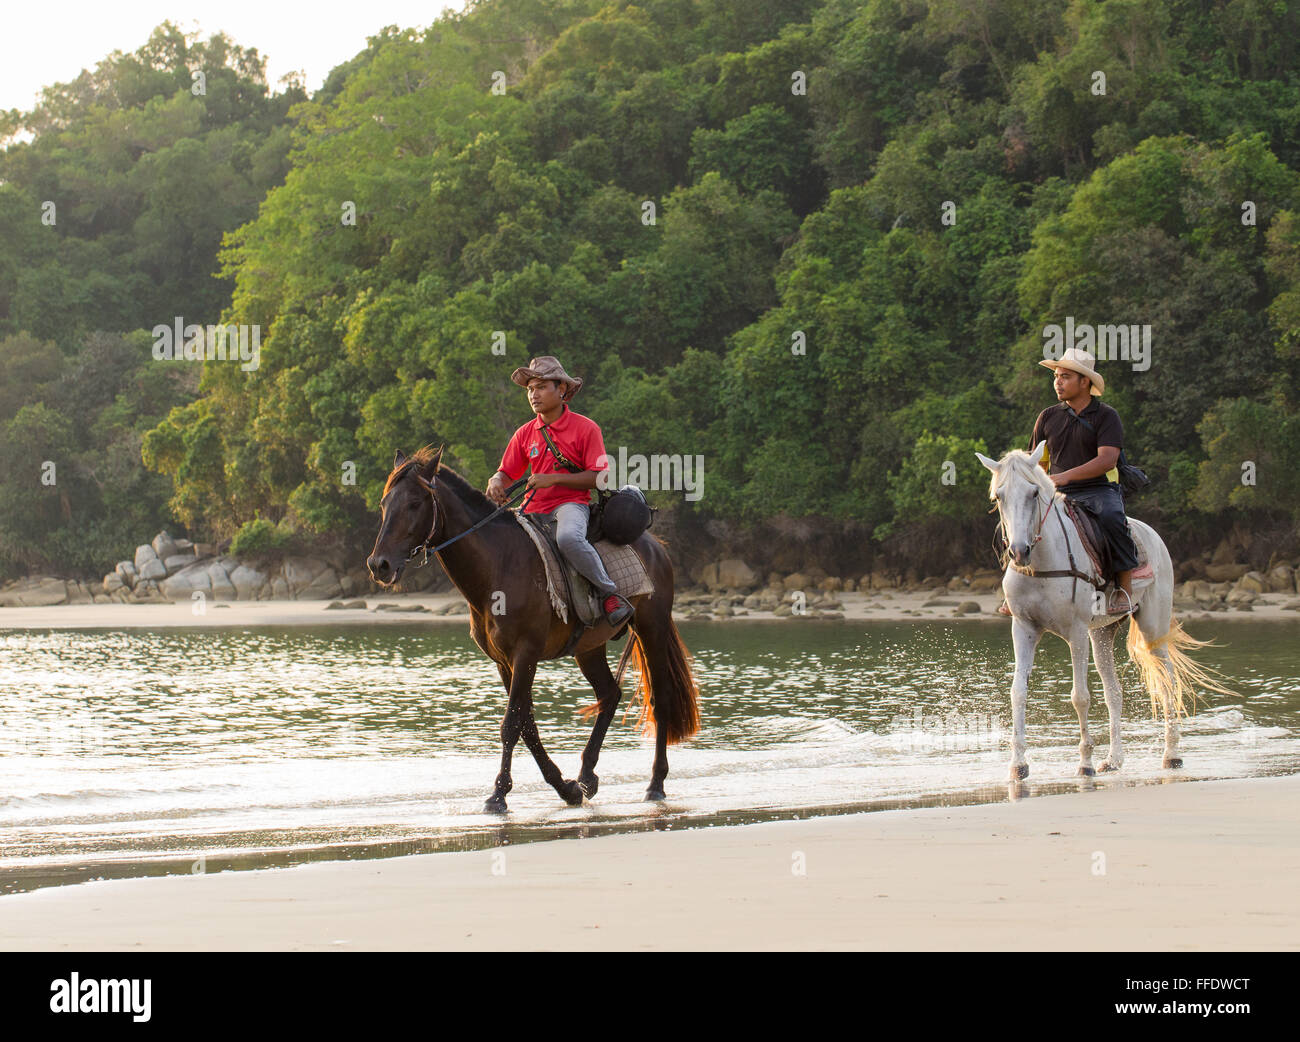 Two local men horseriding on a beach in western Sabah, Malaysia Stock Photo